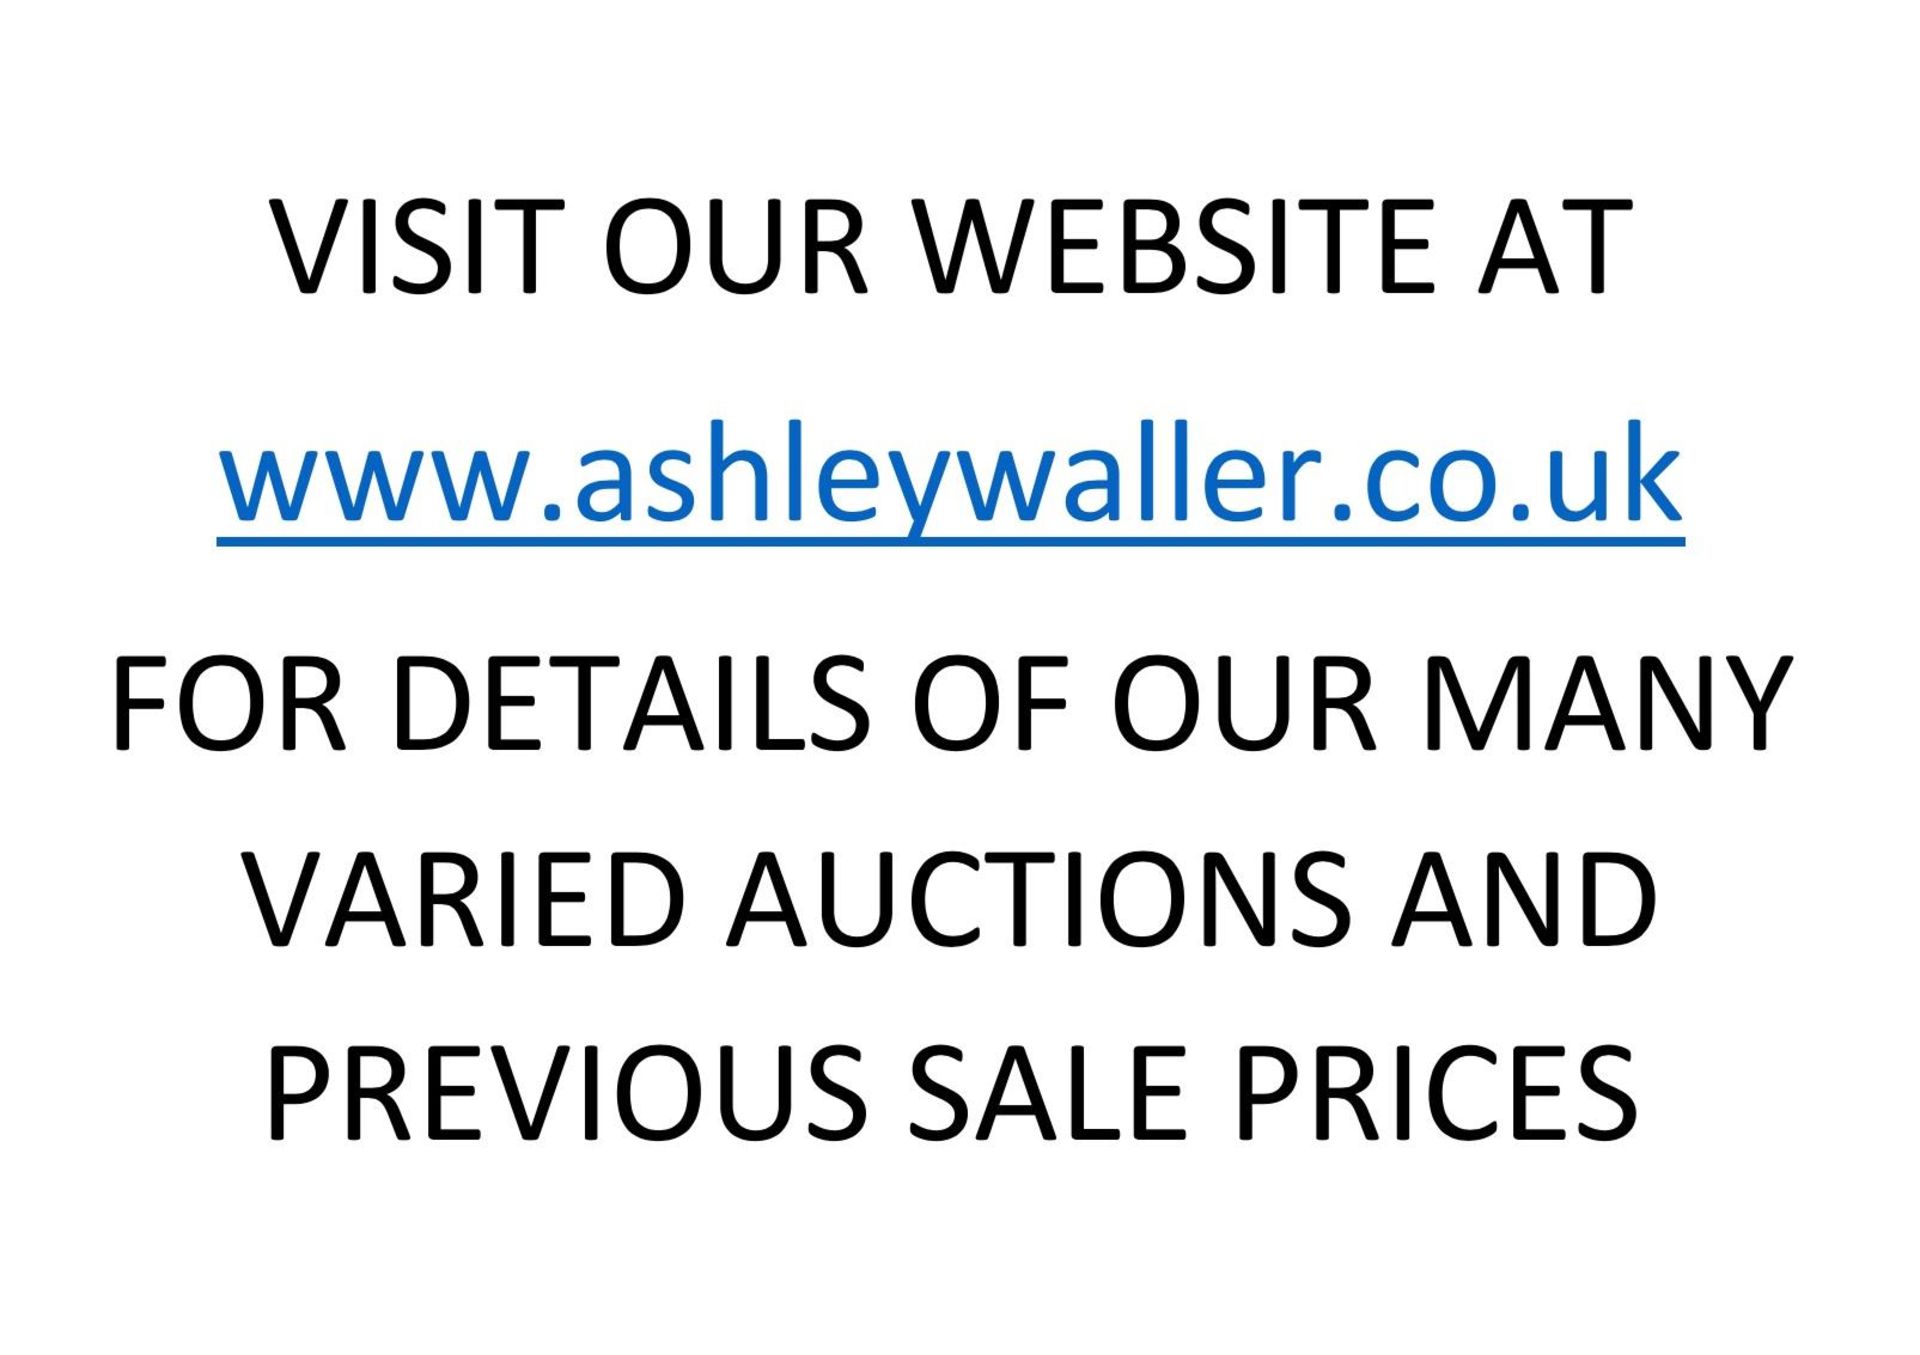 END OF SALE, THANK YOU FOR YOUR BIDDING. OUR NEXT SALE IS ON THE 13TH & 14TH SEPTEMBER 2023